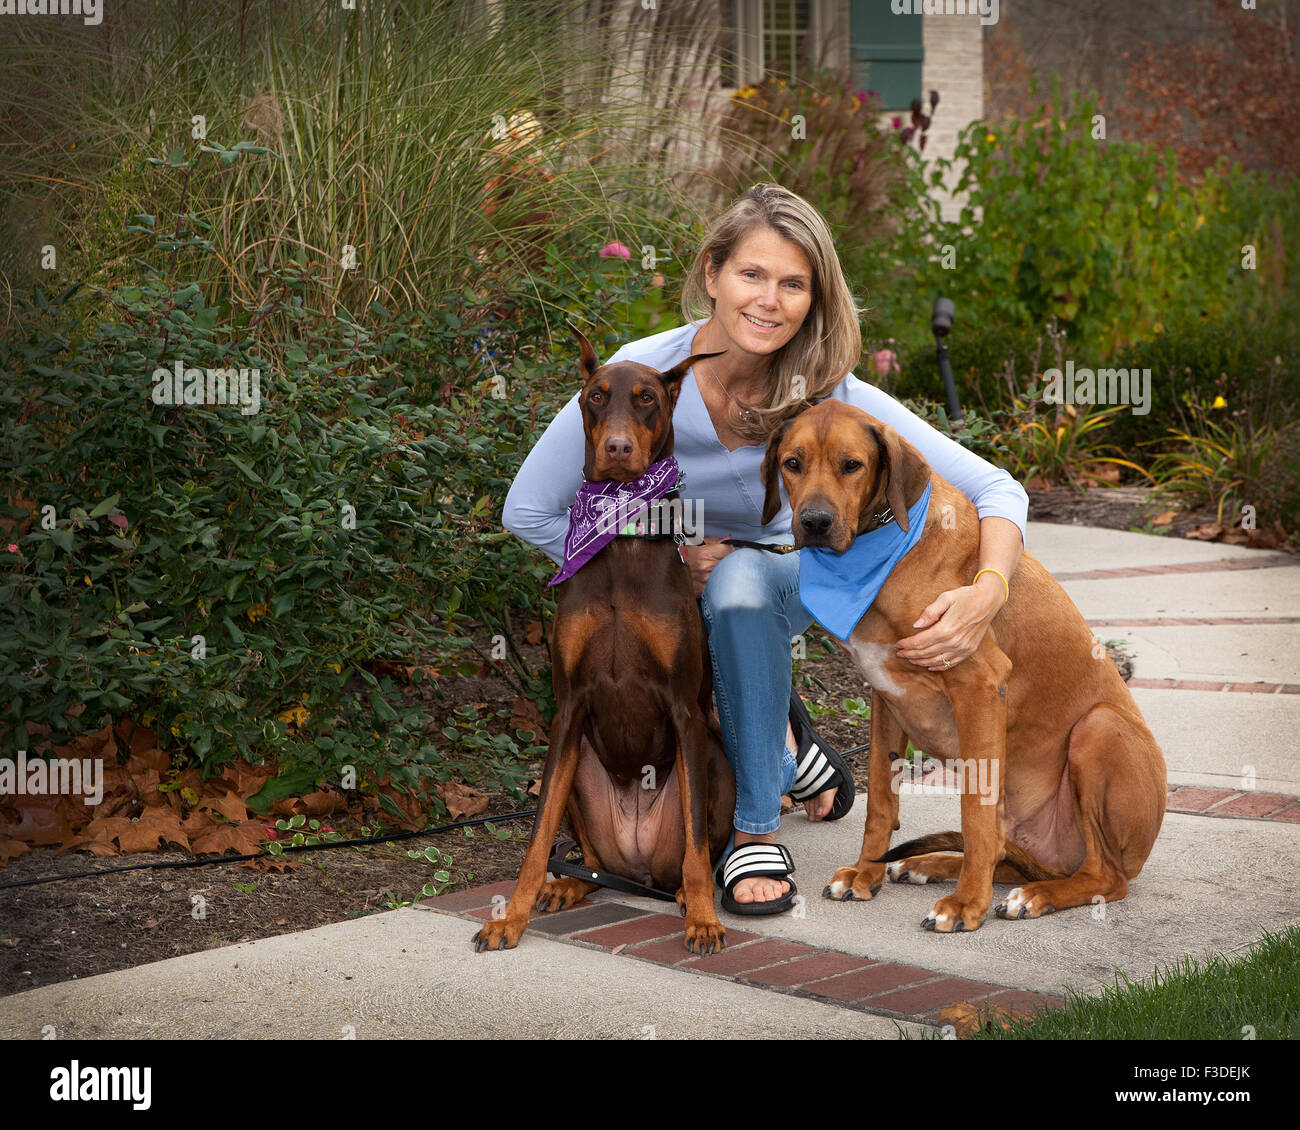 Middle aged attractive woman on sidewalk with her 2 large pet dog companions. A space of green foilage, plants to her left side. Stock Photo